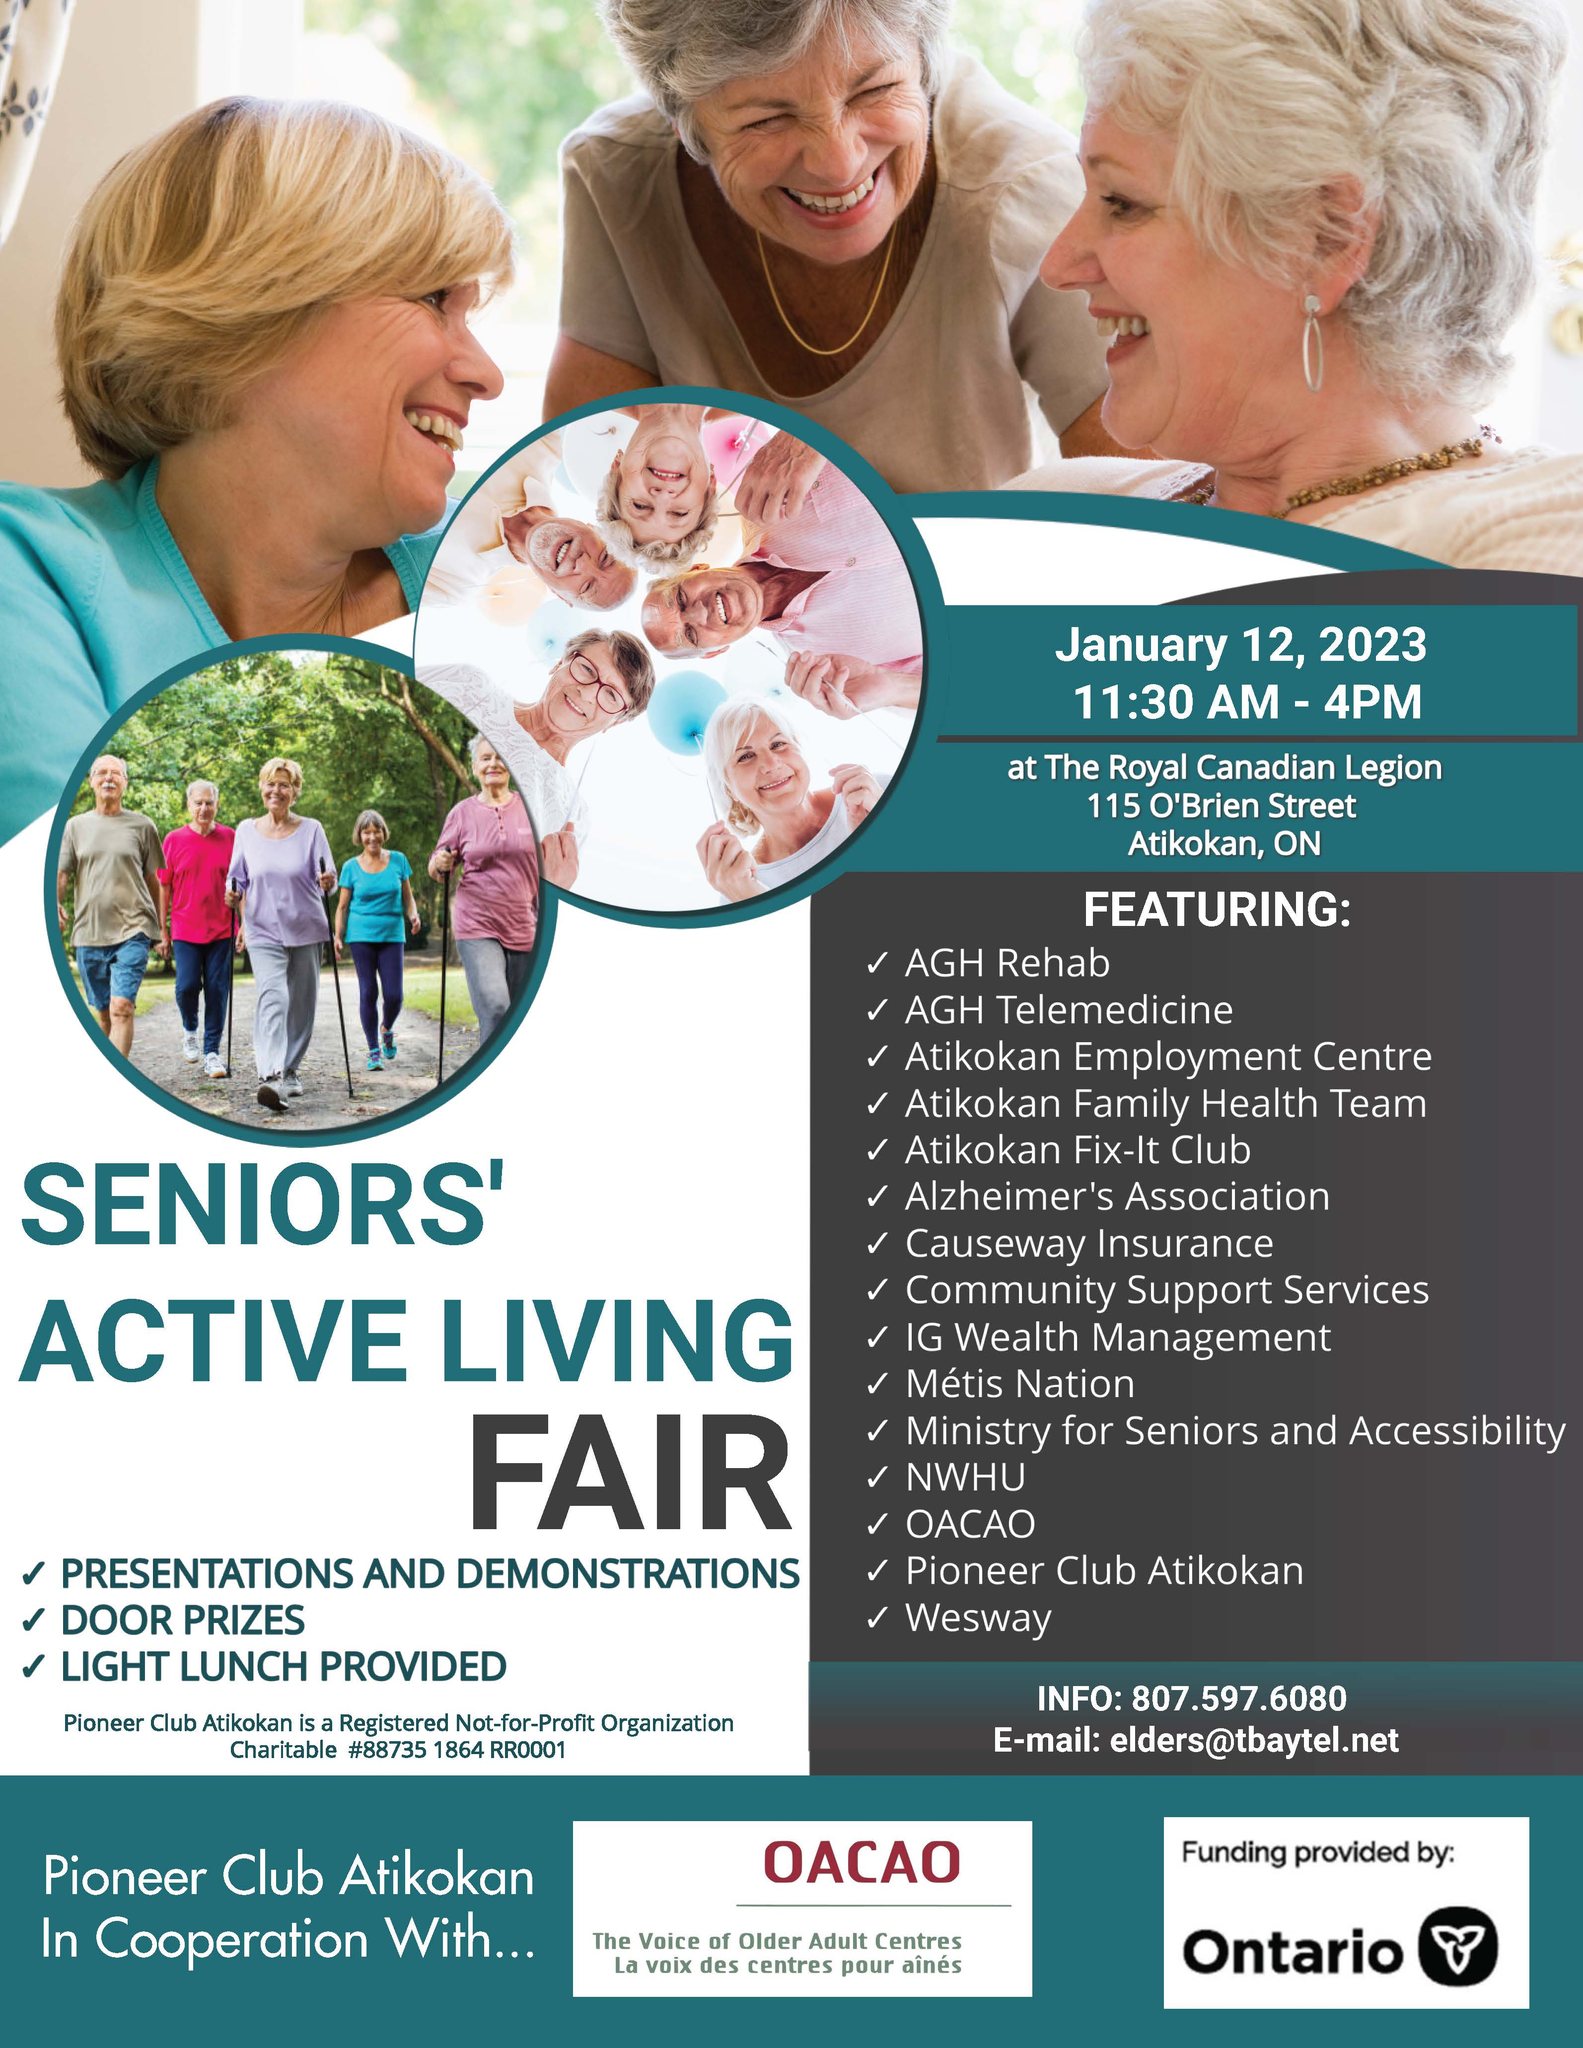 Ministry for Seniors and Accessibility